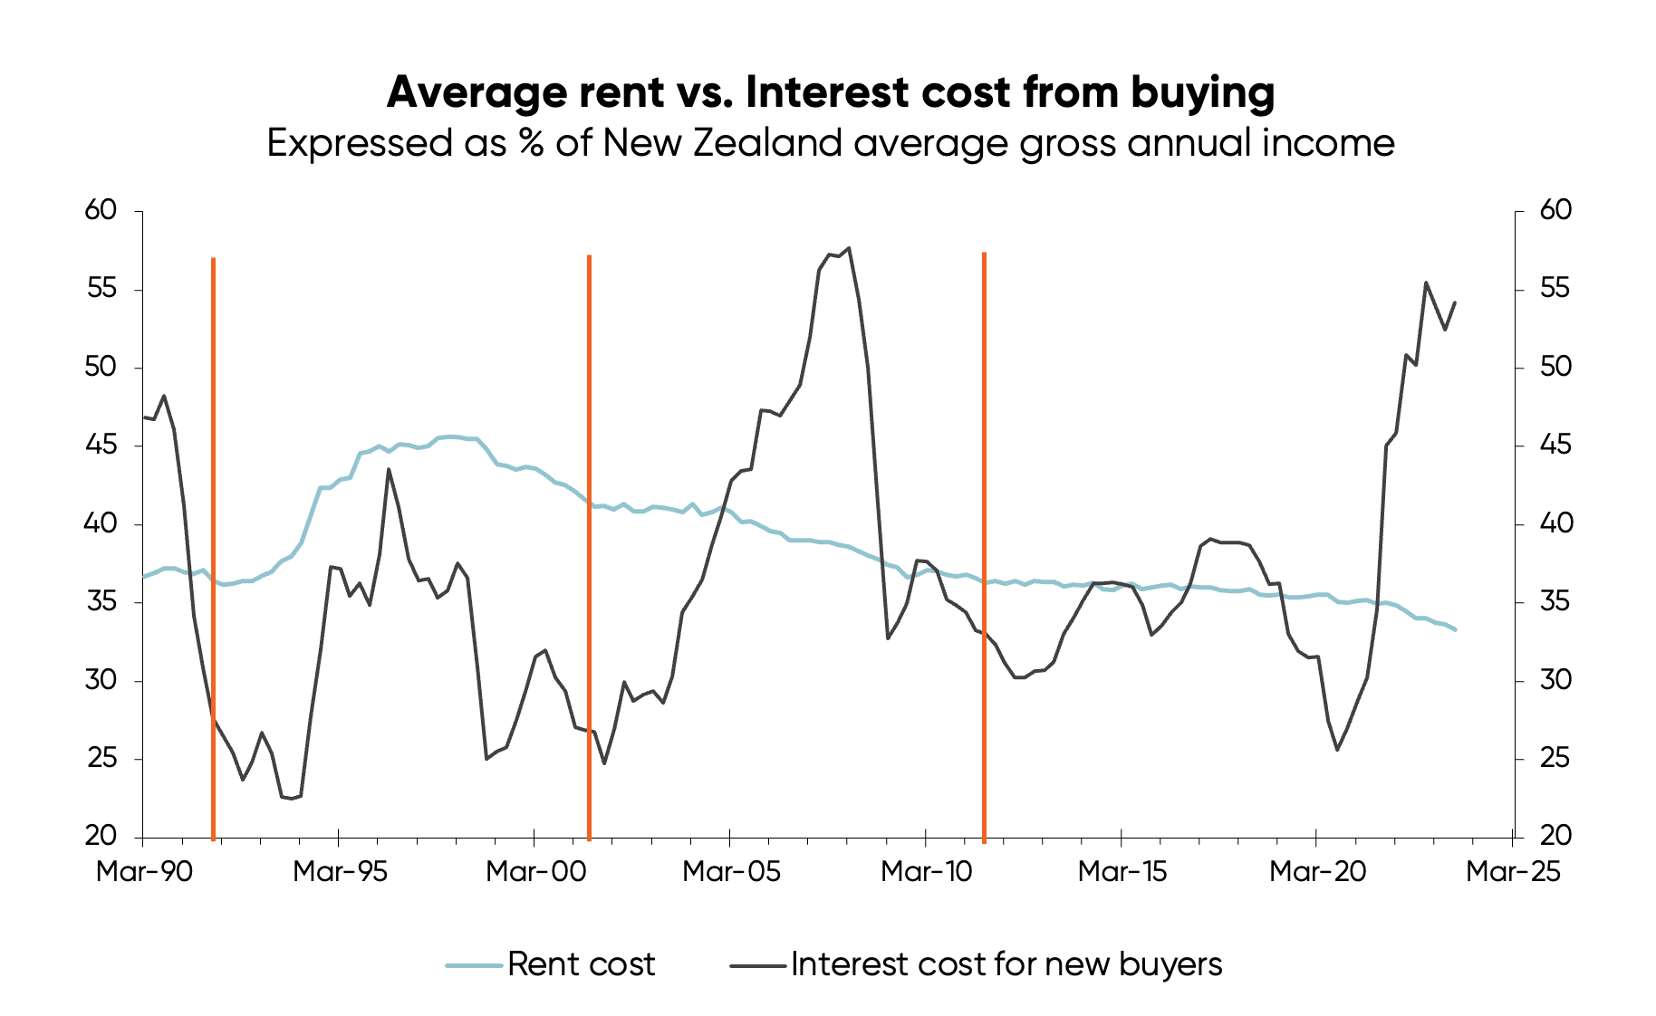 Chart tracking the average cost of renting vs. average interest cost of buying a new house